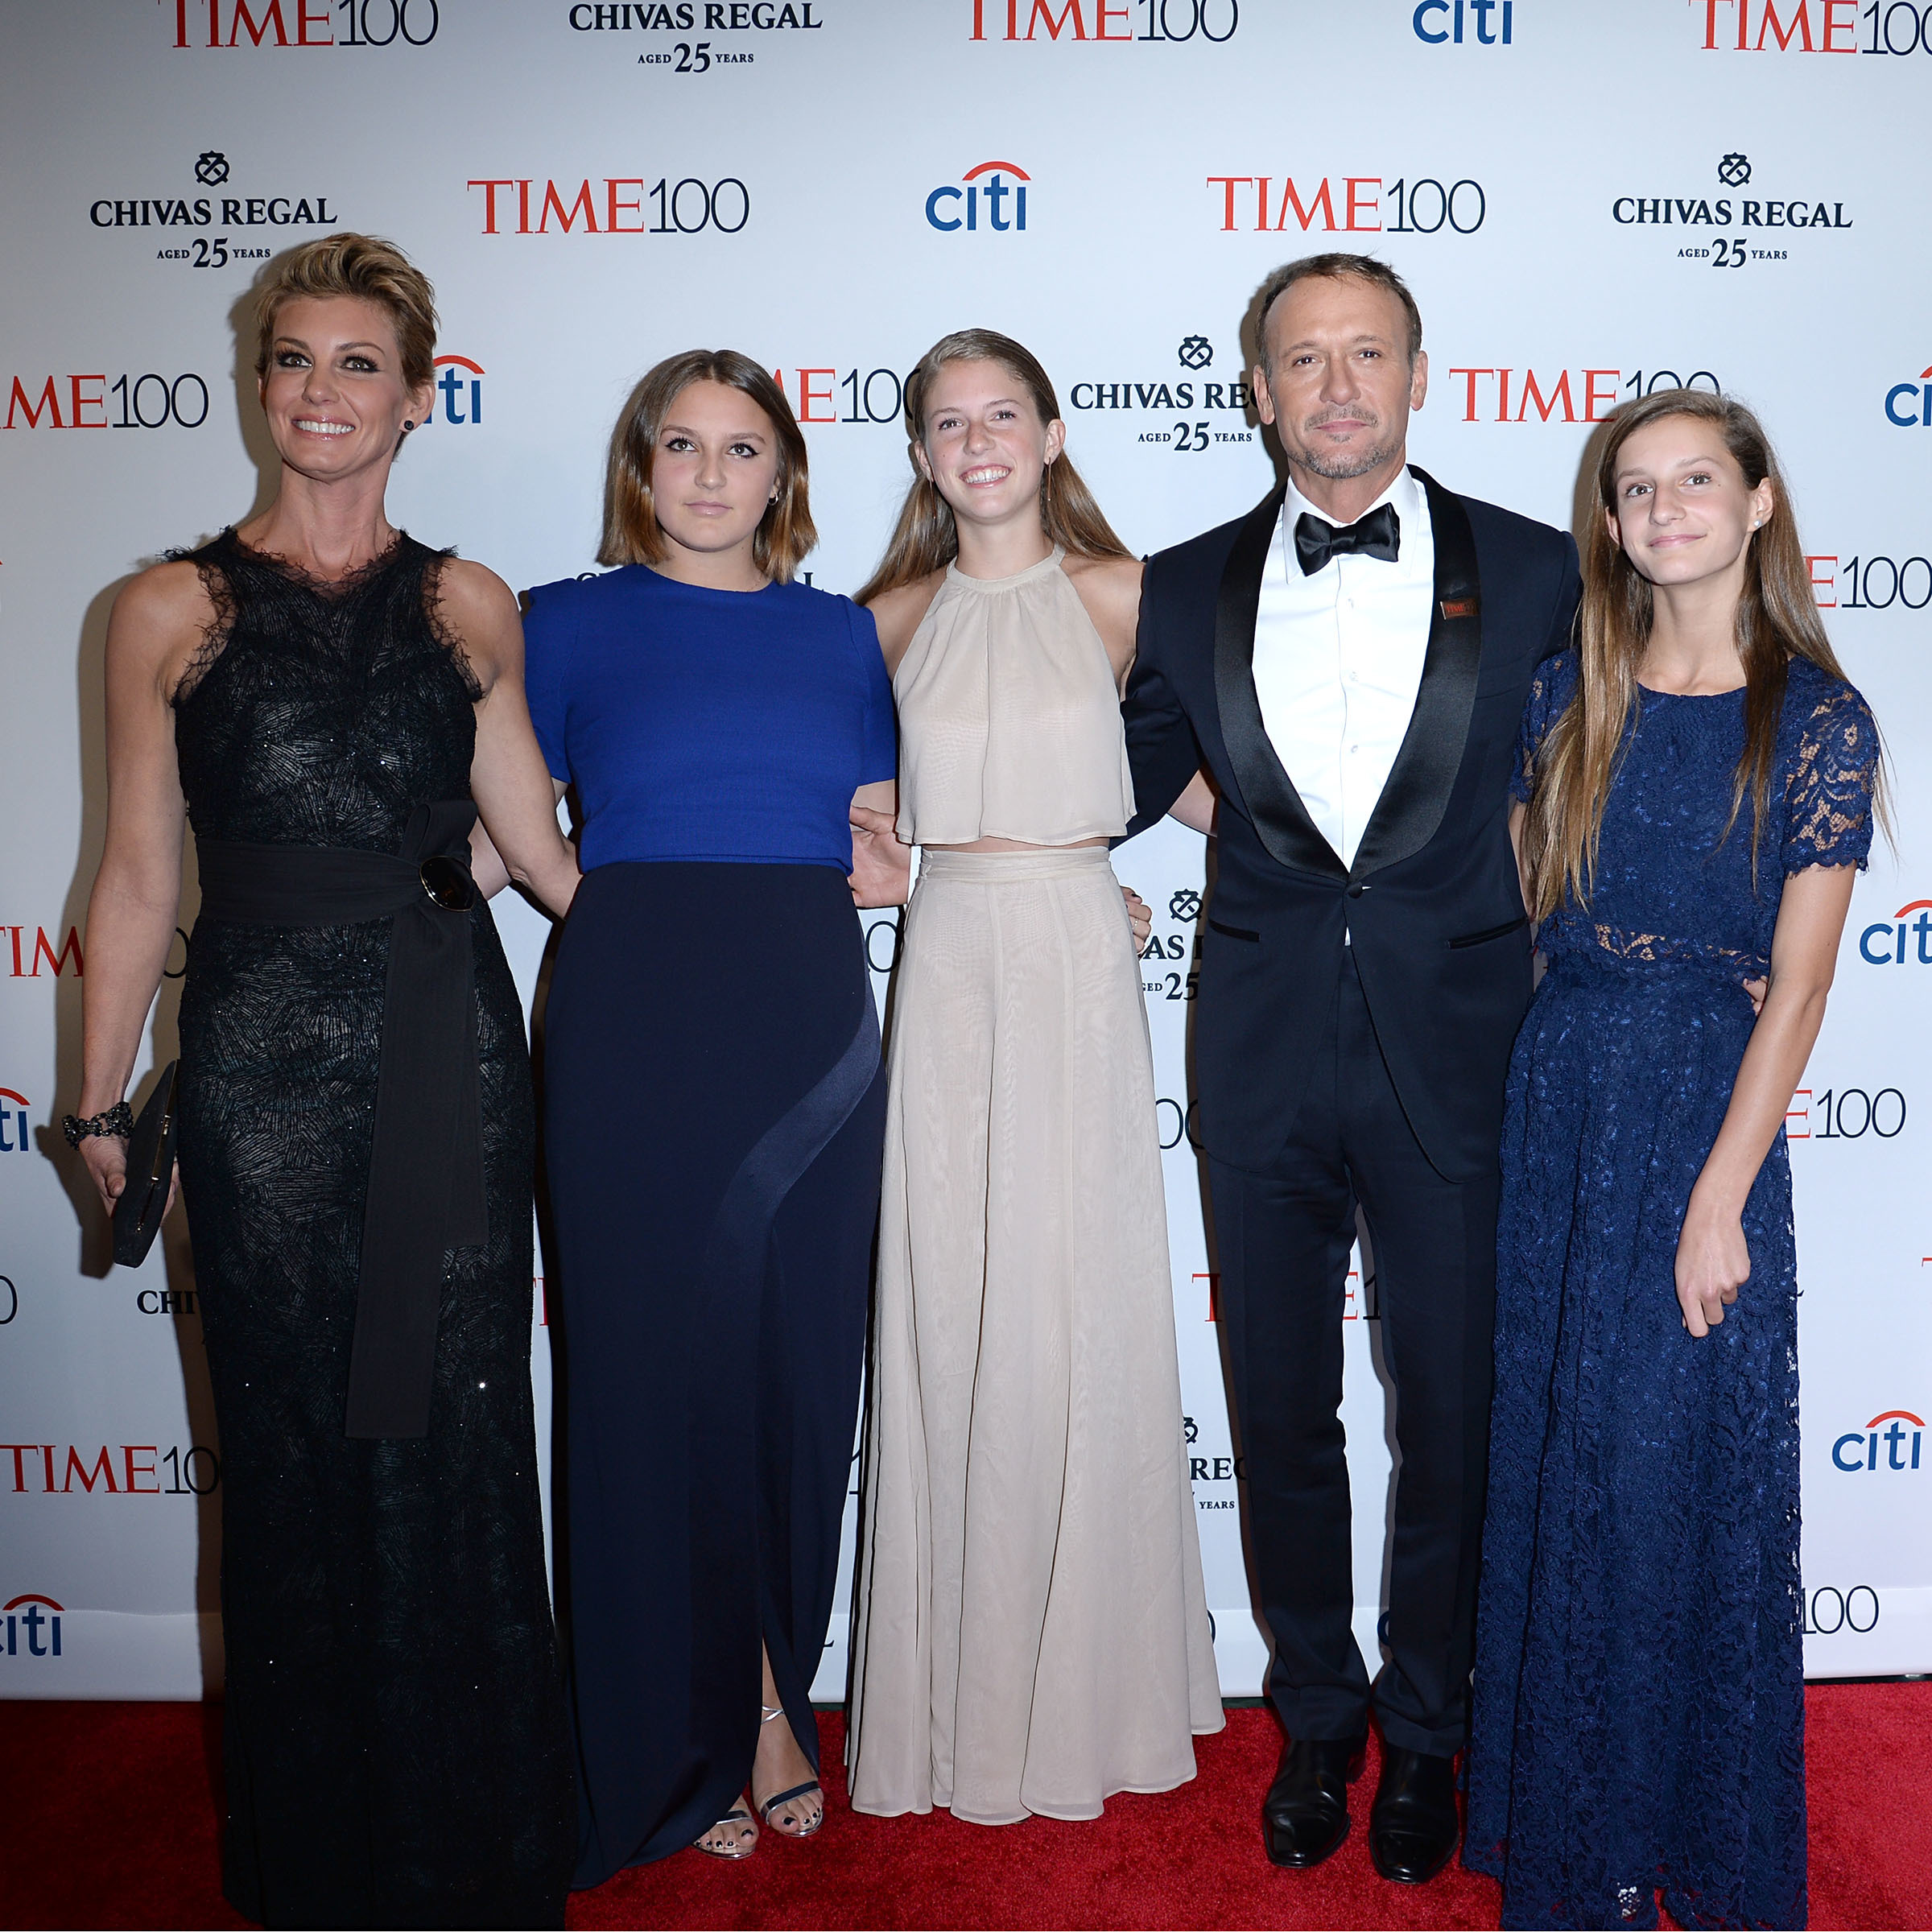 <p>Country music stars <a href="https://www.wonderwall.com/celebrity/profiles/overview/faith-hill-281.article">Faith Hill</a> and Tim McGraw posed with daughters Gracie, Maggie and Audrey at the Time 100 Gala in New York City on April 21, 2015. You'll never believe how much little Audrey, the youngest, has grown up since then...</p>